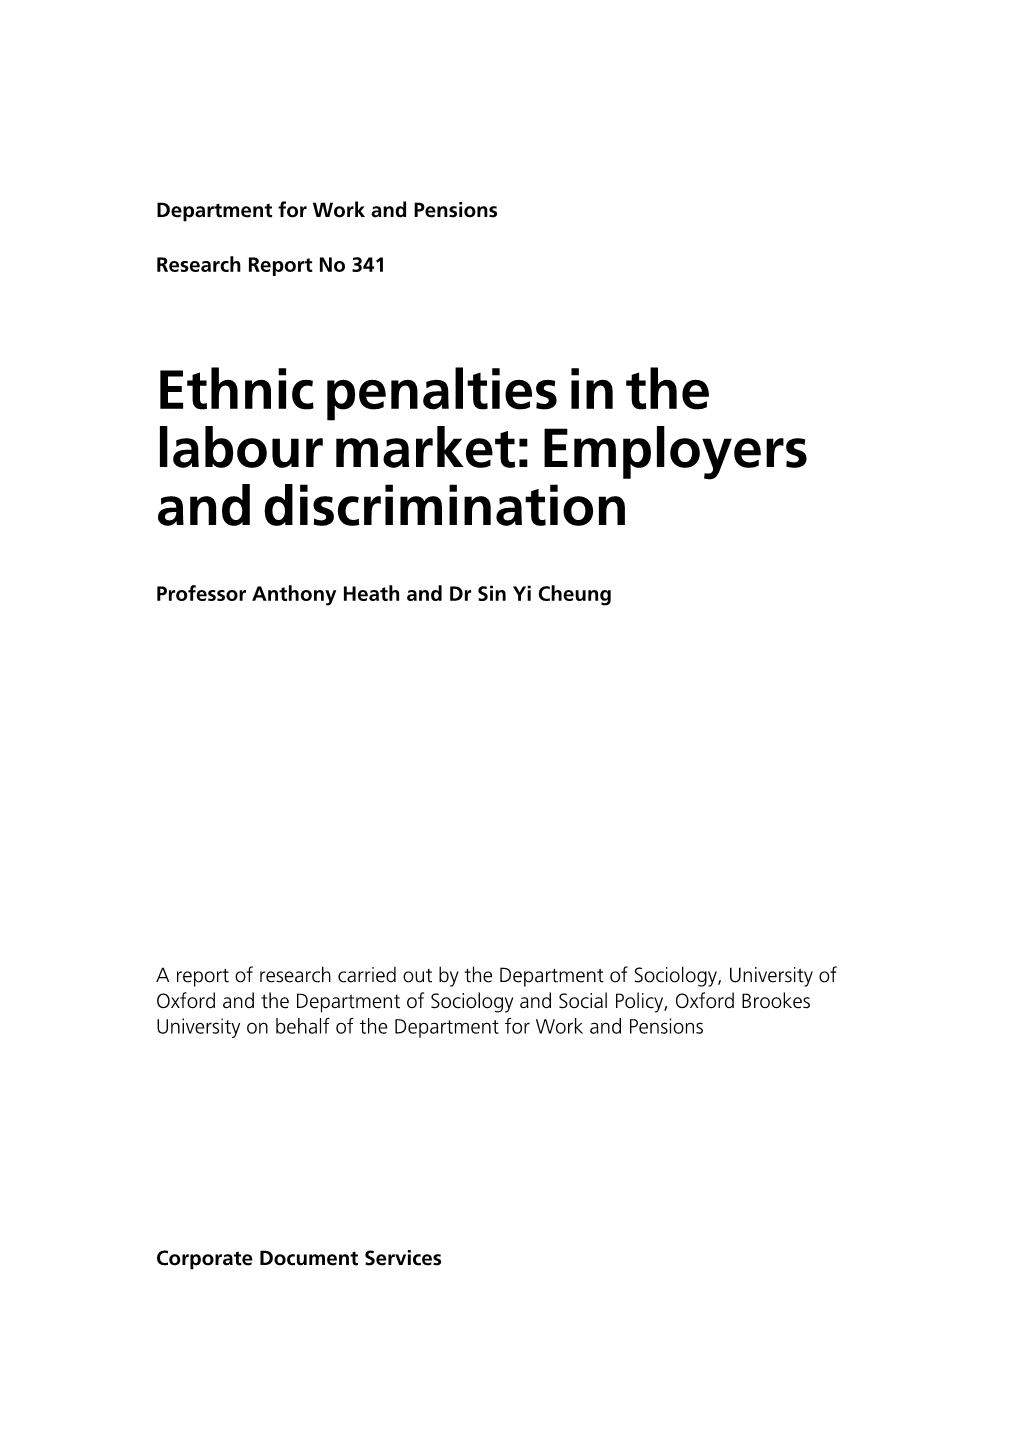 Ethnic Penalties in the Labour Market: Employers and Discrimination